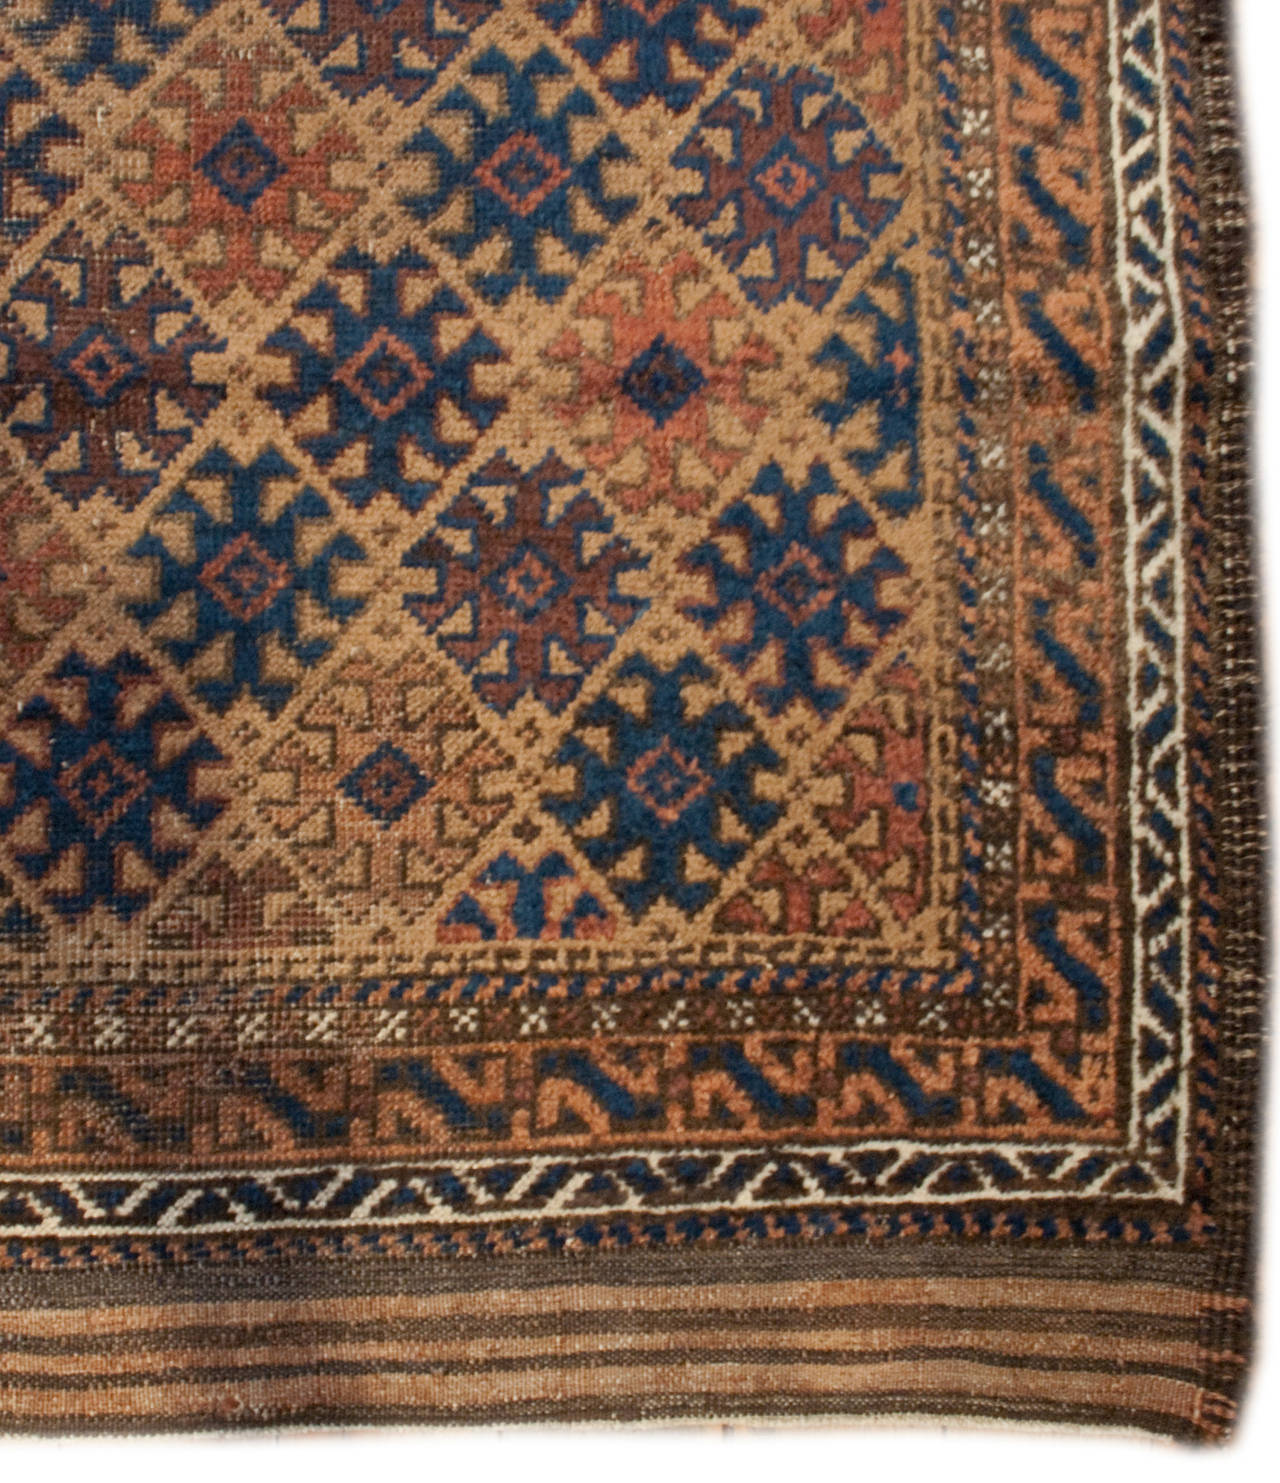 A wonderful early 20th century Persian Baluch rug with a wonderful all-over multicolored geometric pattern surrounded by multiple complementary borders.